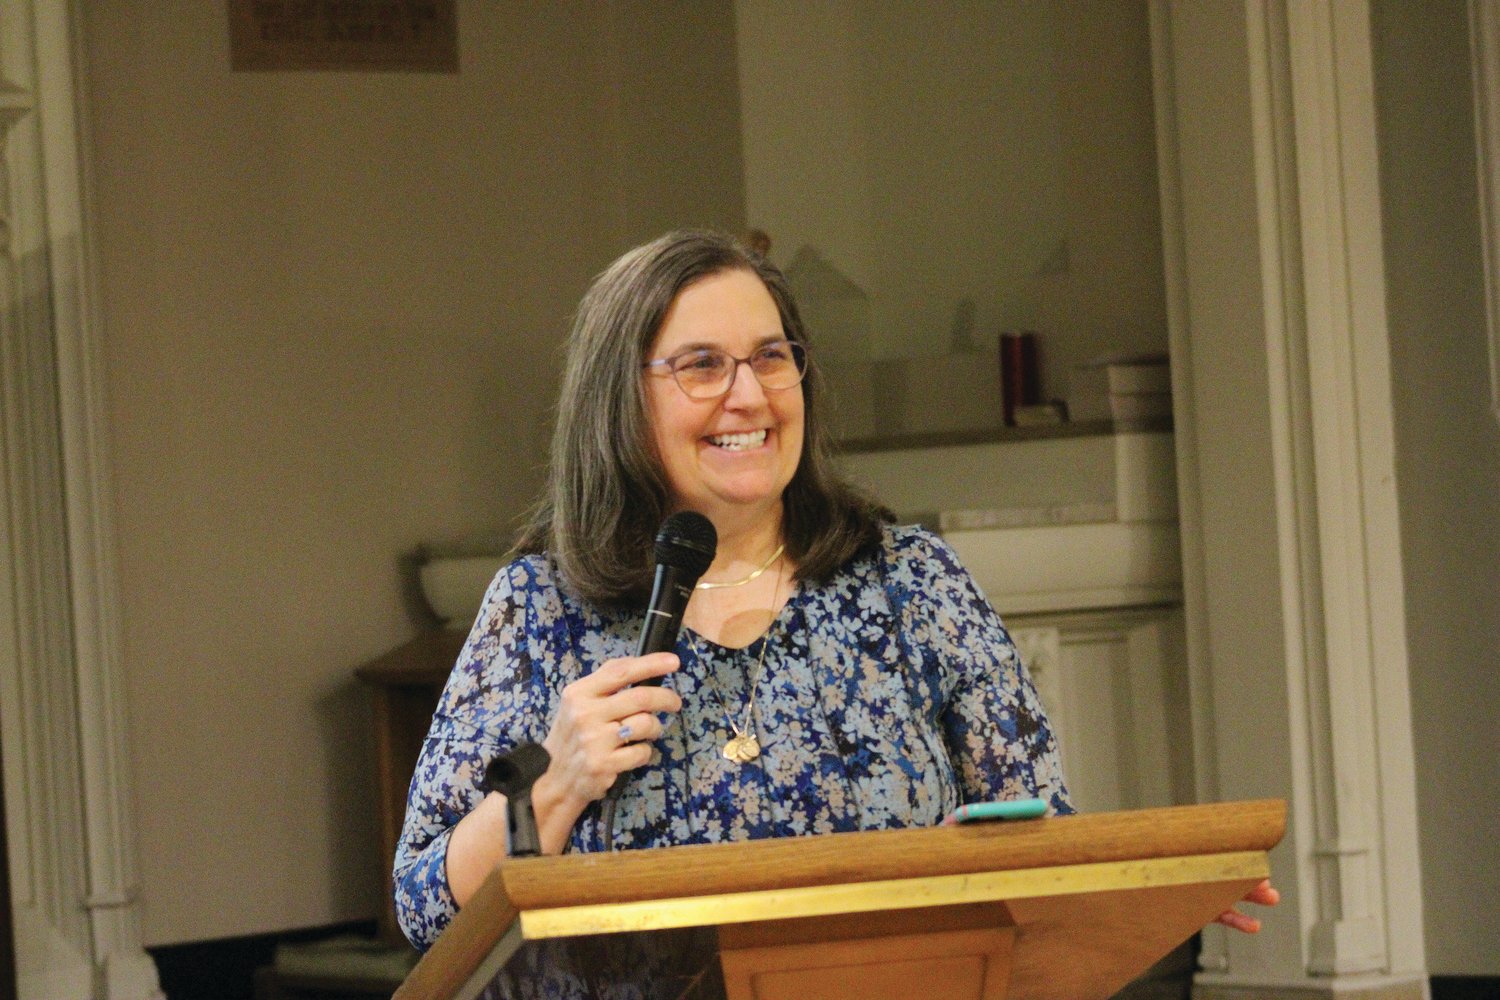 The Office of Faith Formation’s 2022 Women’s Conference featured presentations by Pat Gohn, pictured, a national Catholic speaker, author, podcaster, and editor of “Living Faith Daily Catholic Devotions;” as well as Sister Josemaría Pence, O.P., Dominican Sister of St. Cecilia of Nashville, Tennessee, and principal of St. Pius V School, Providence.